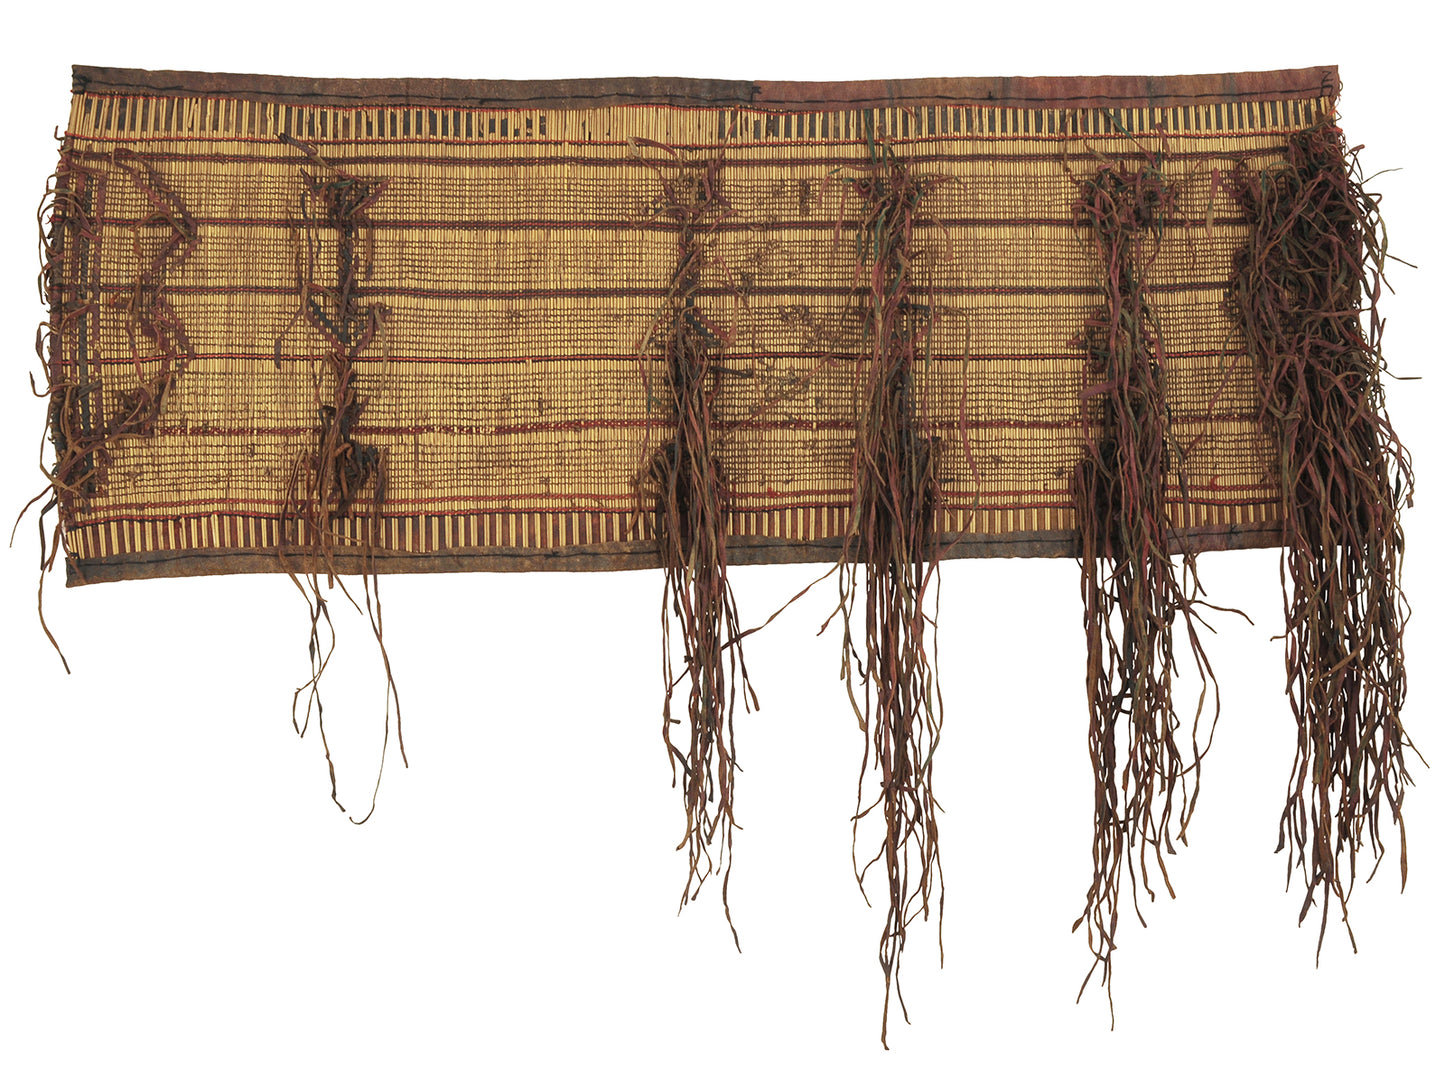 Authentic Tuareg Straw Mat from Niger - A Cultural African Artifact from Sahara